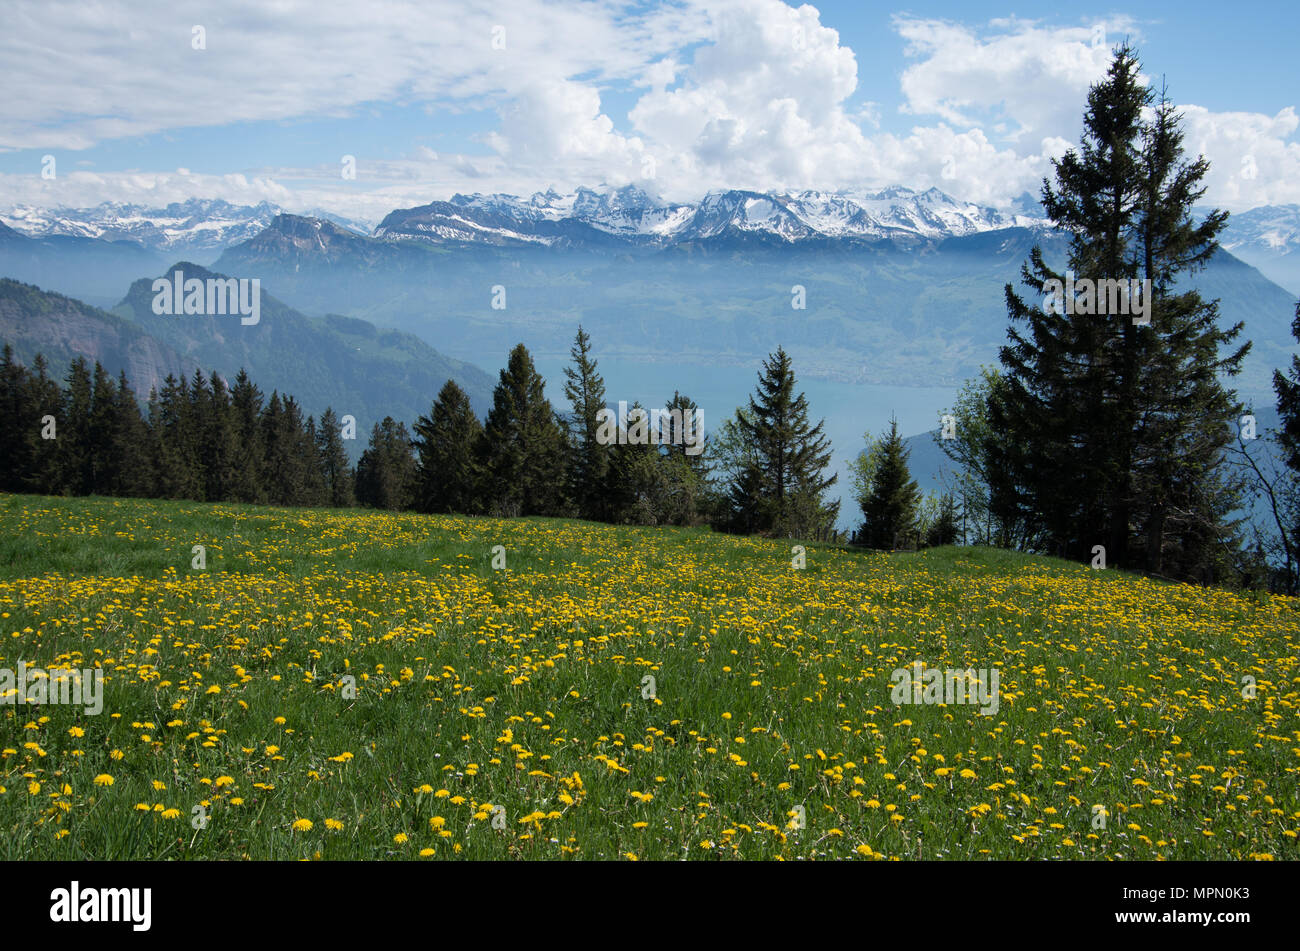 View of the swiss alps from Mount rigi with flowering dandelions and alpine forests in the foreground on a partly cloudy day. Stock Photo